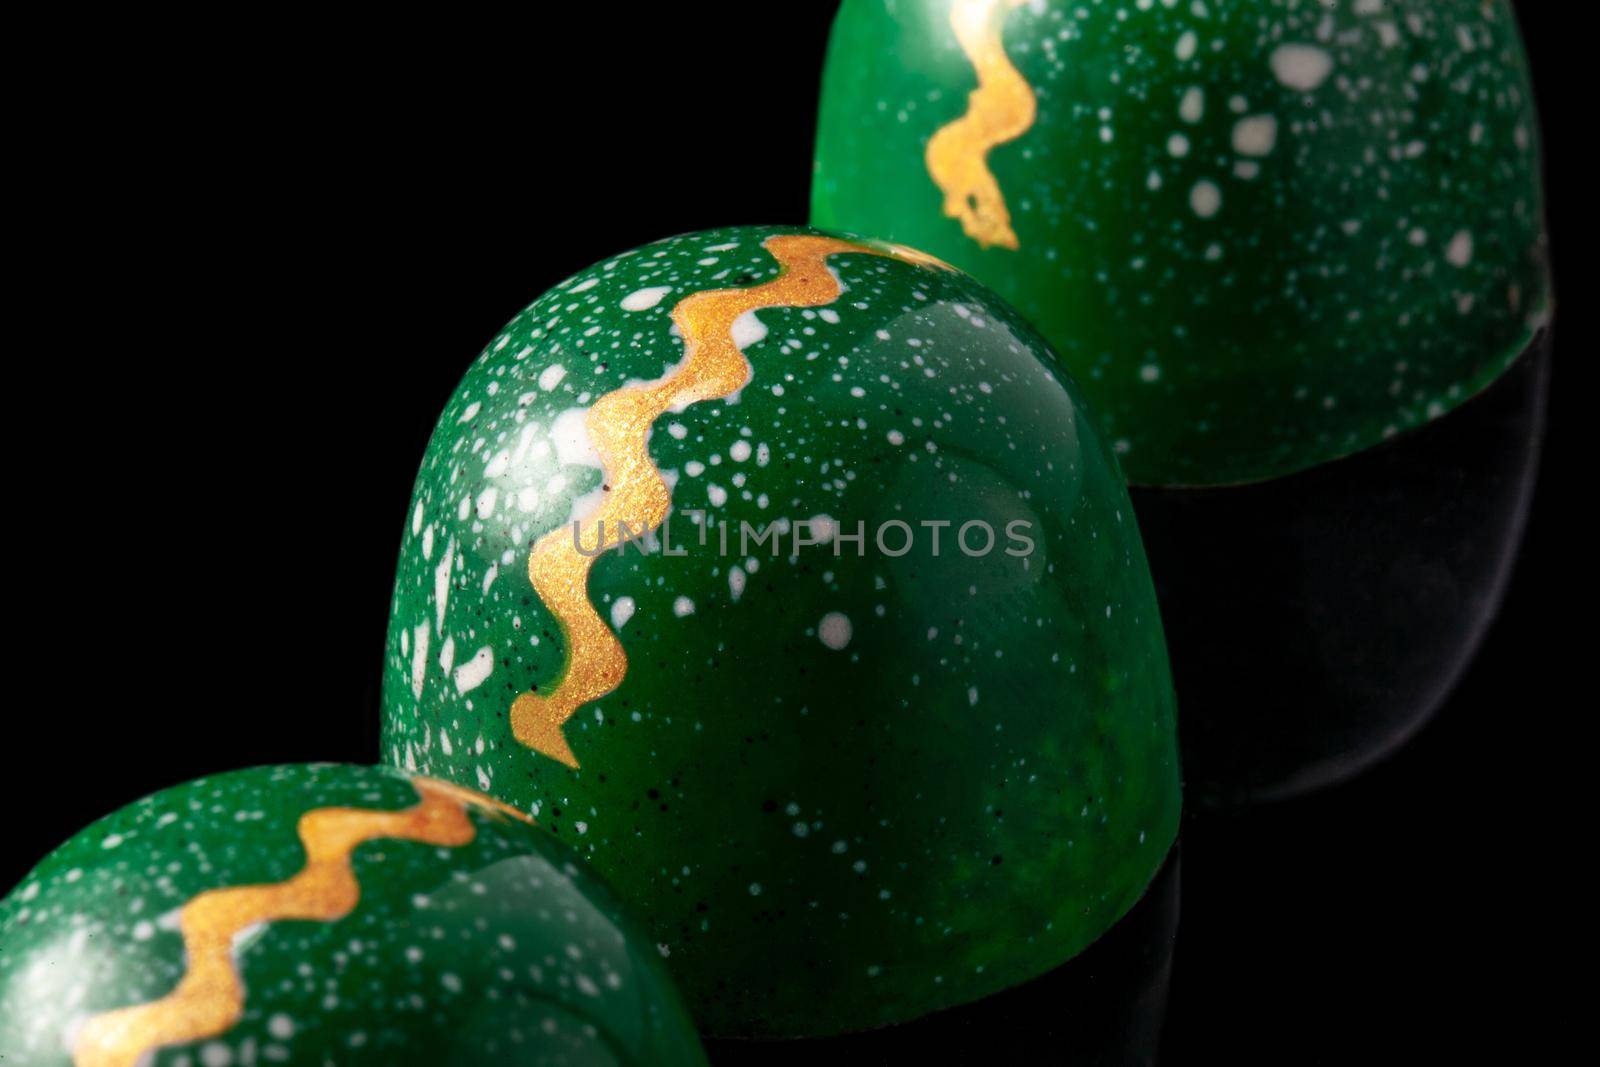 Luxury handmade chocolate candies on black background. Green candies with multicolored drops. Exclusive handcrafted bonbon. Product concept for chocolatier. Close-up